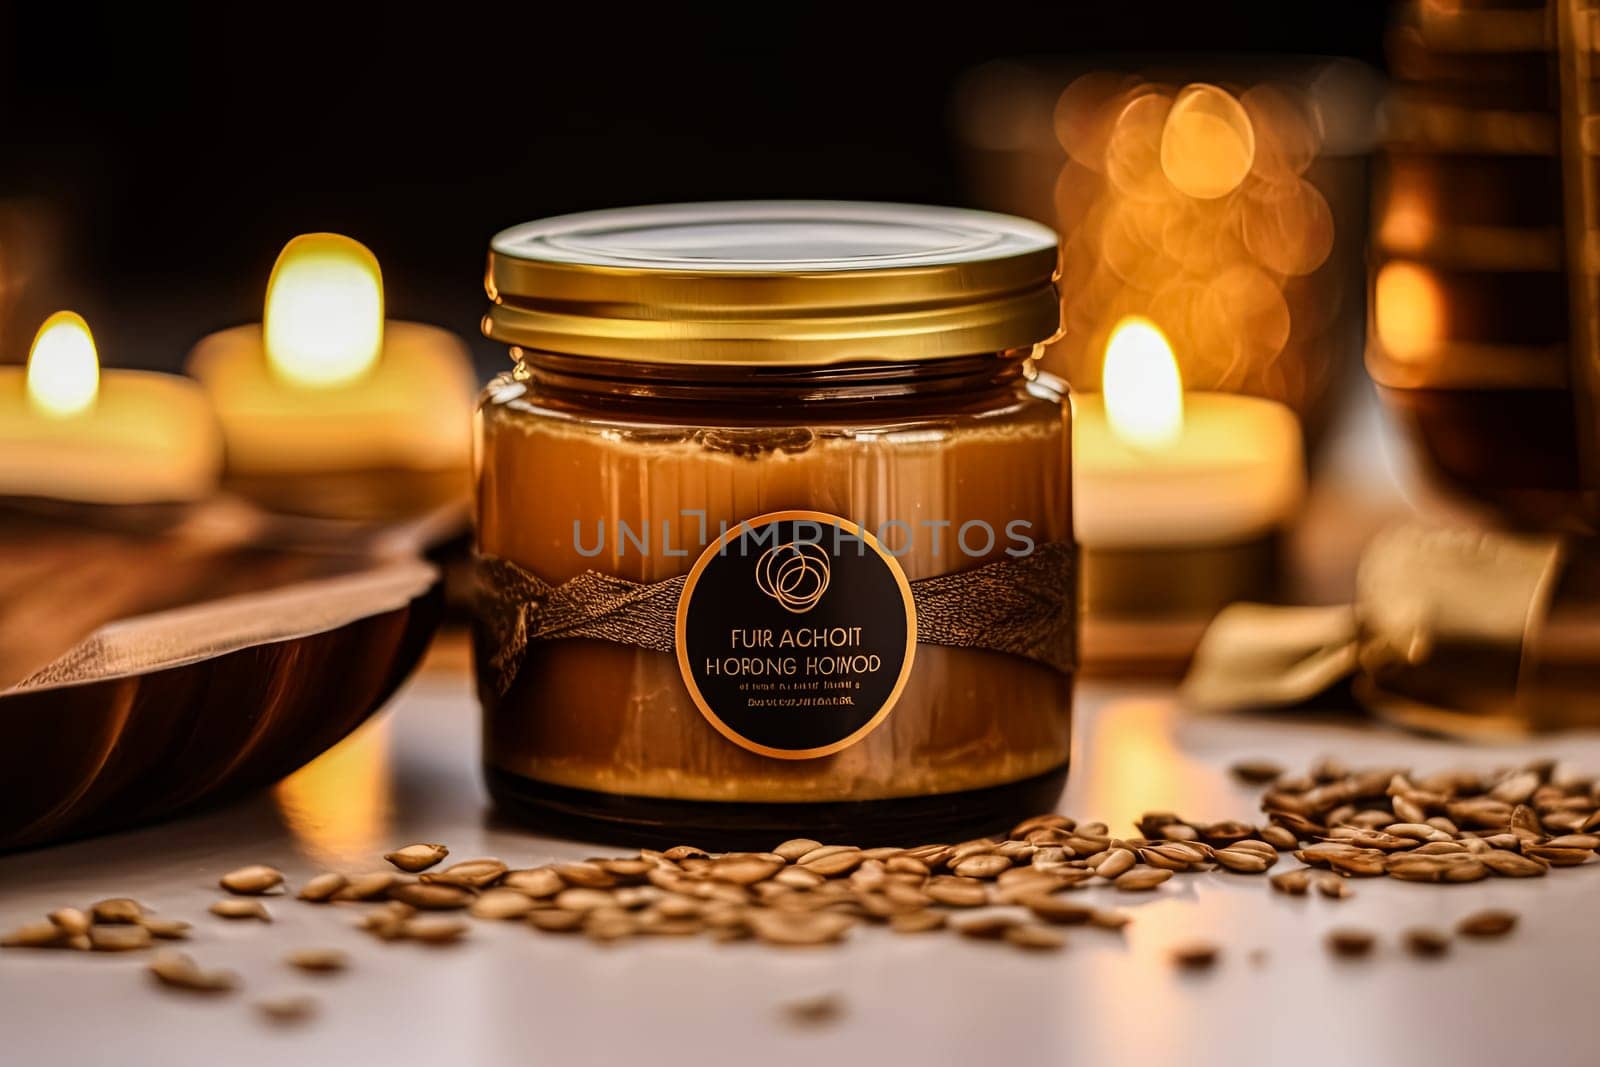 A jar of face cream sits on the table next to a bowl of seeds, surrounded by candles creating a warm ambiance. Oat based face cream.